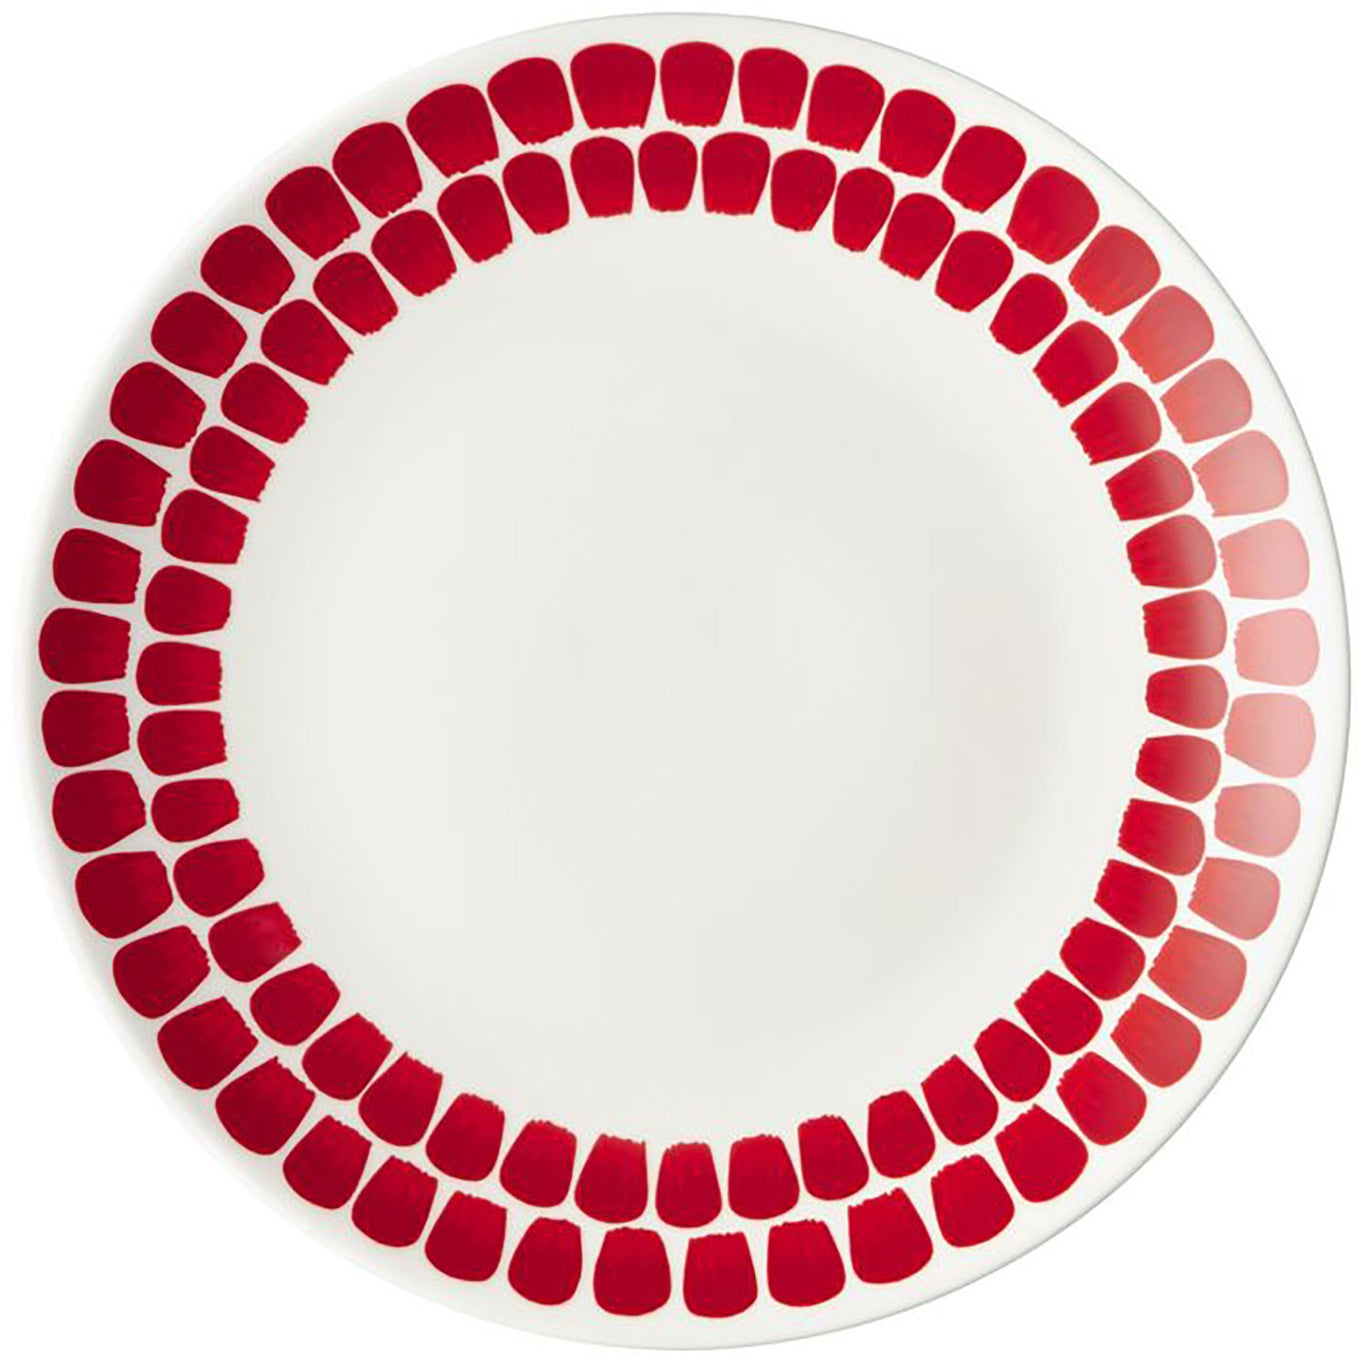 24H by Arabia Finland Plate 26cm / 10.5" Dinner Plate Tuokio Red